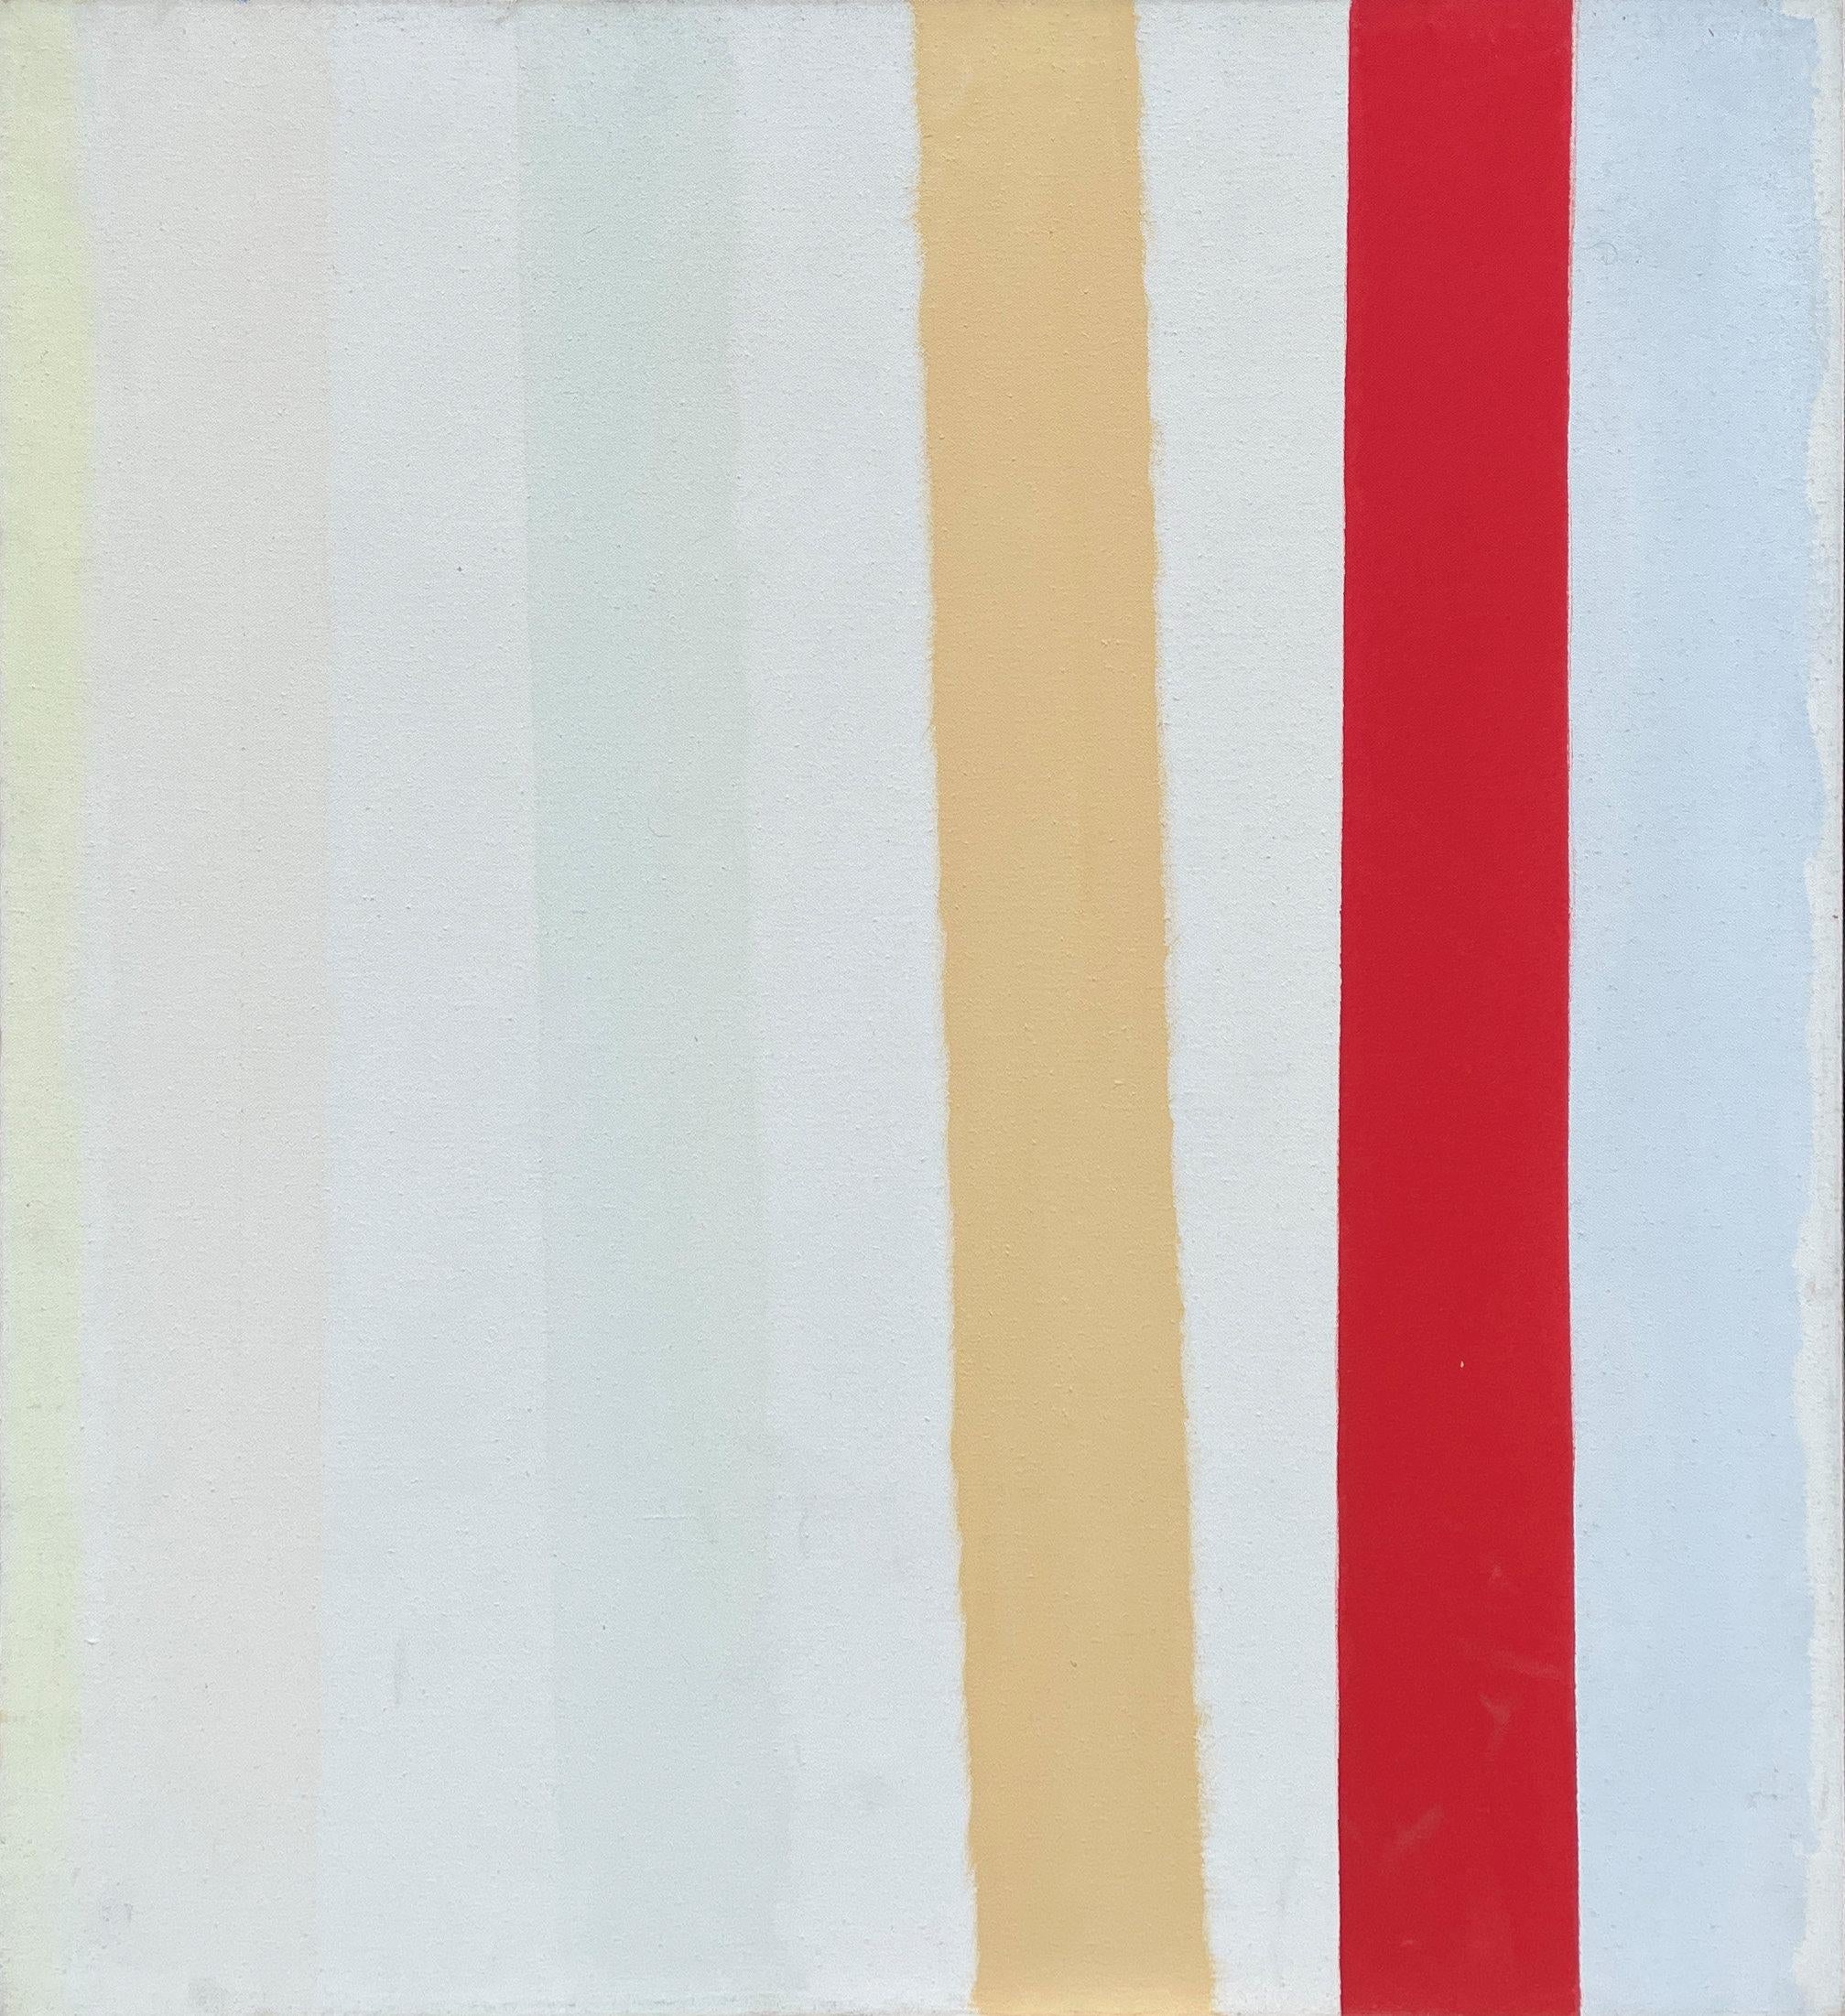 Calvert Coggeshall
A Stripe, 1971
Signed, titled, and dated on the reverse
Acrylic on canvas
30 x 30 inches

Calvert Coggeshall worked as an abstract painter and interior designer primarily in Maine and New York City. From 1951 to 1978, he exhibited